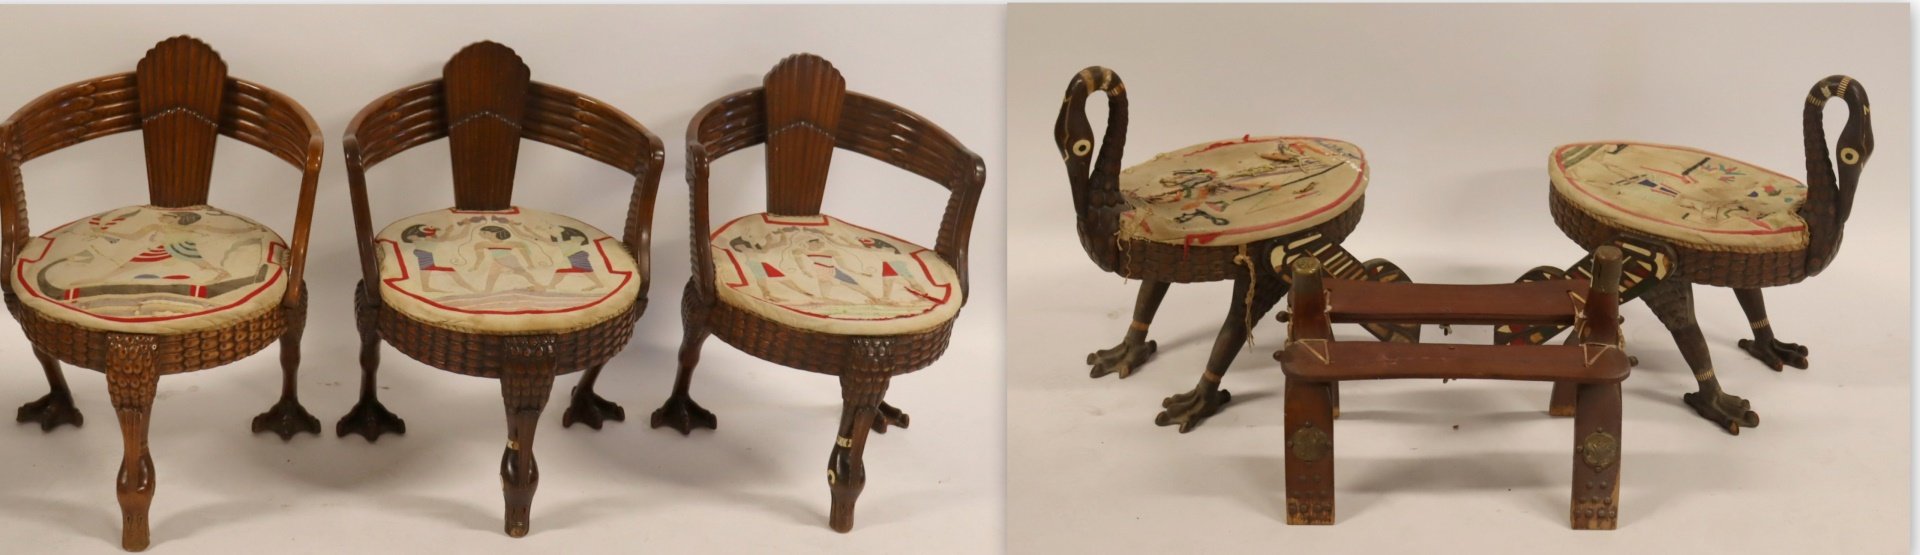 5 ANTIQUE GOOSE CHAIRS WITH EGYPTIAN